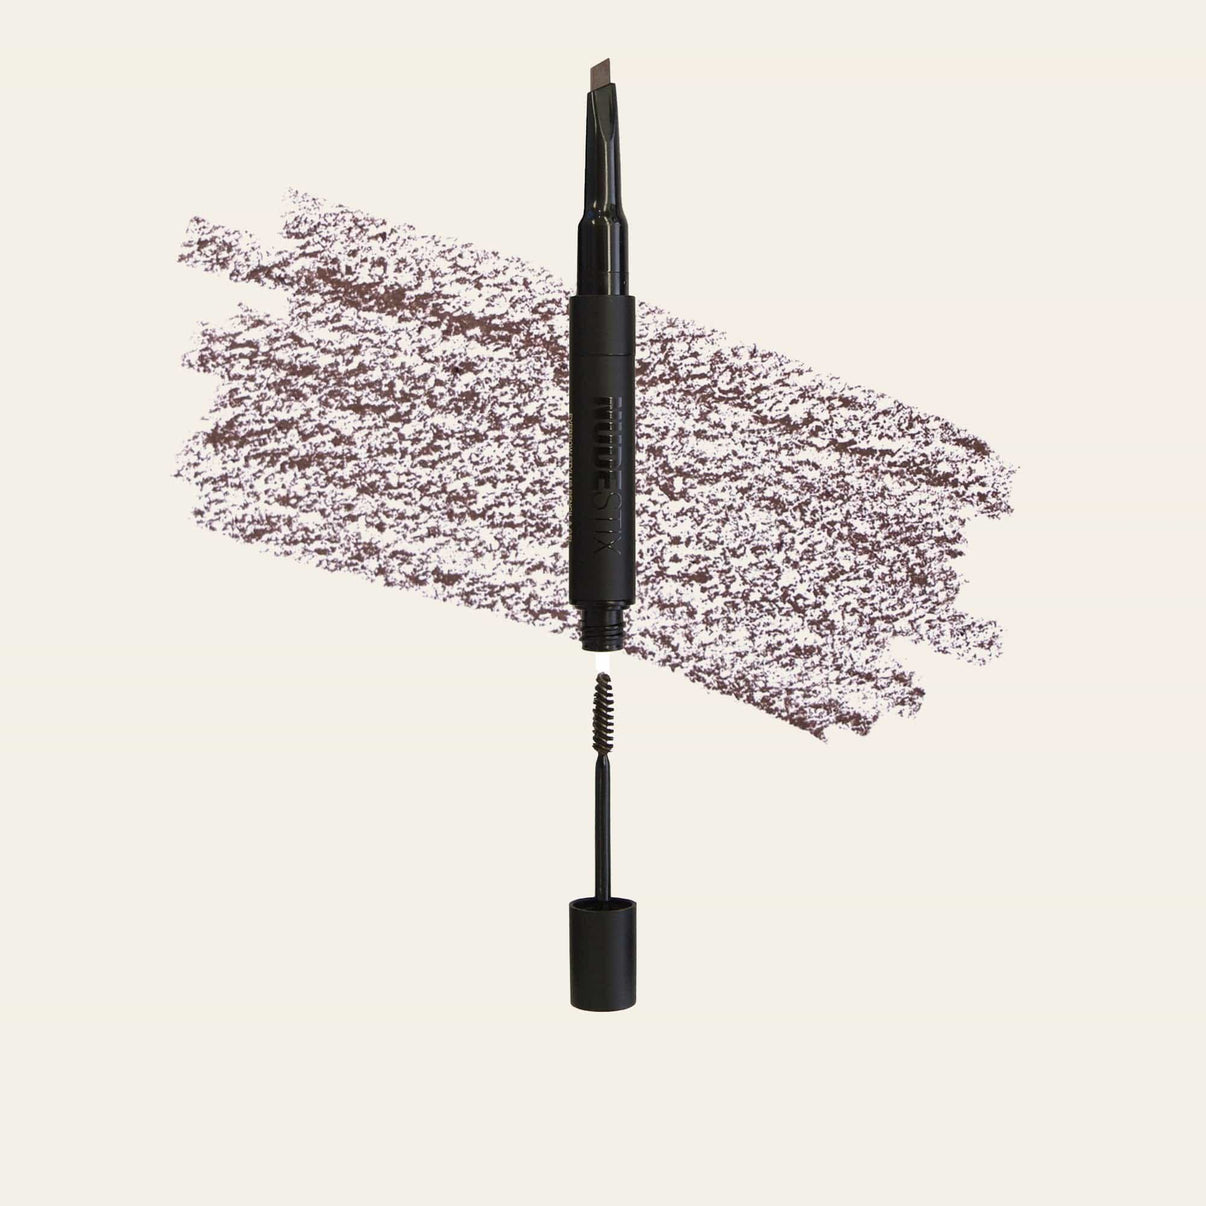 Stylus Eyebrow Pencil & Gel in shade brown with texture swatch